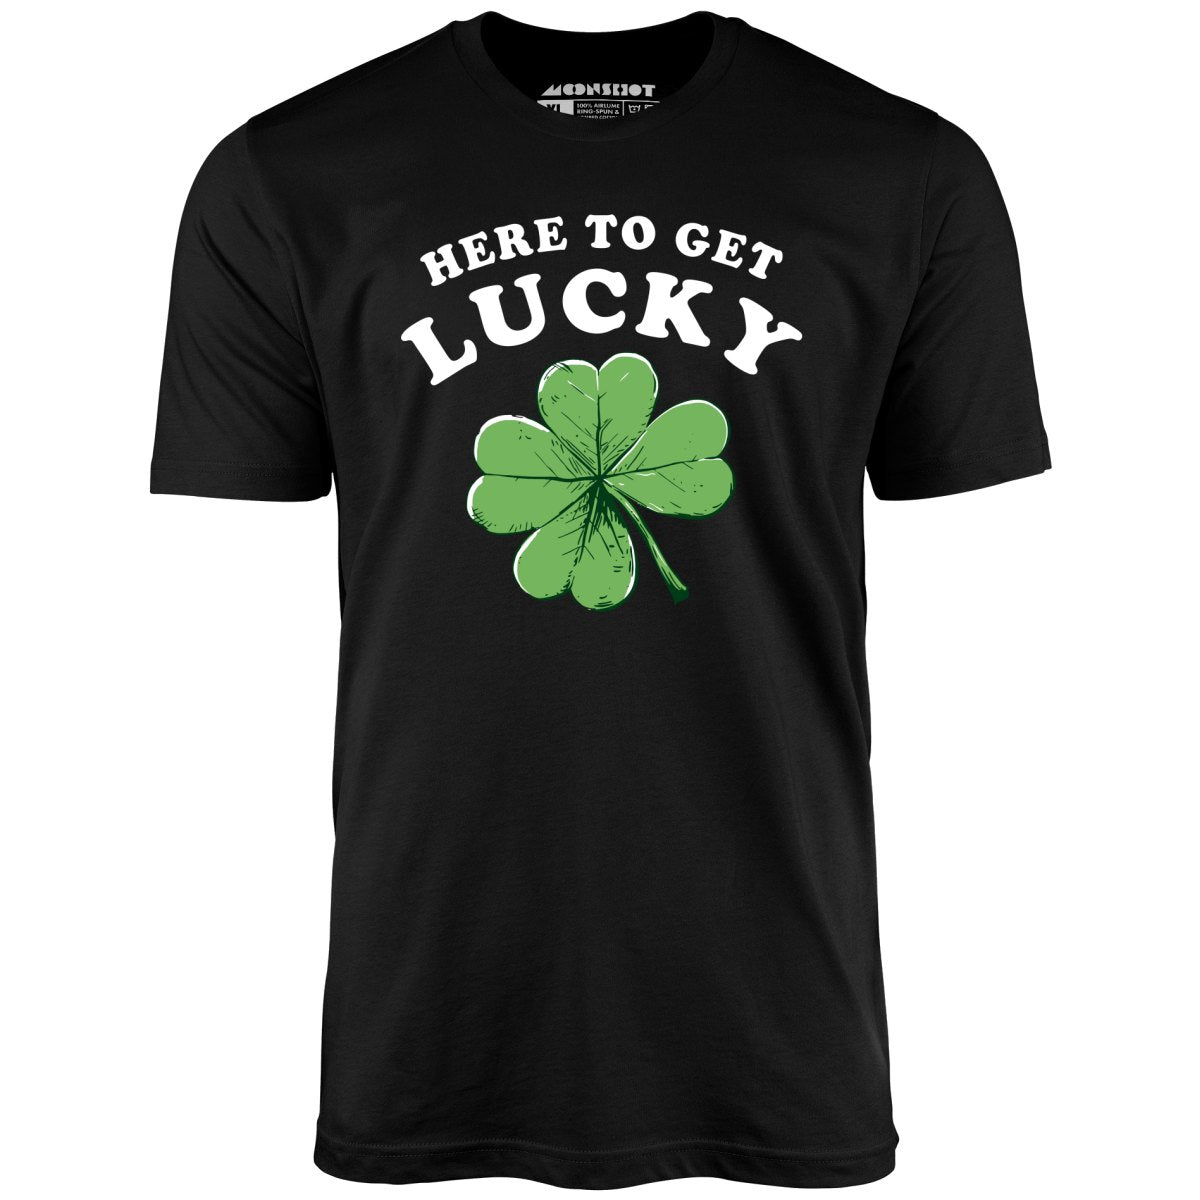 Here To Get Lucky - Unisex T-Shirt